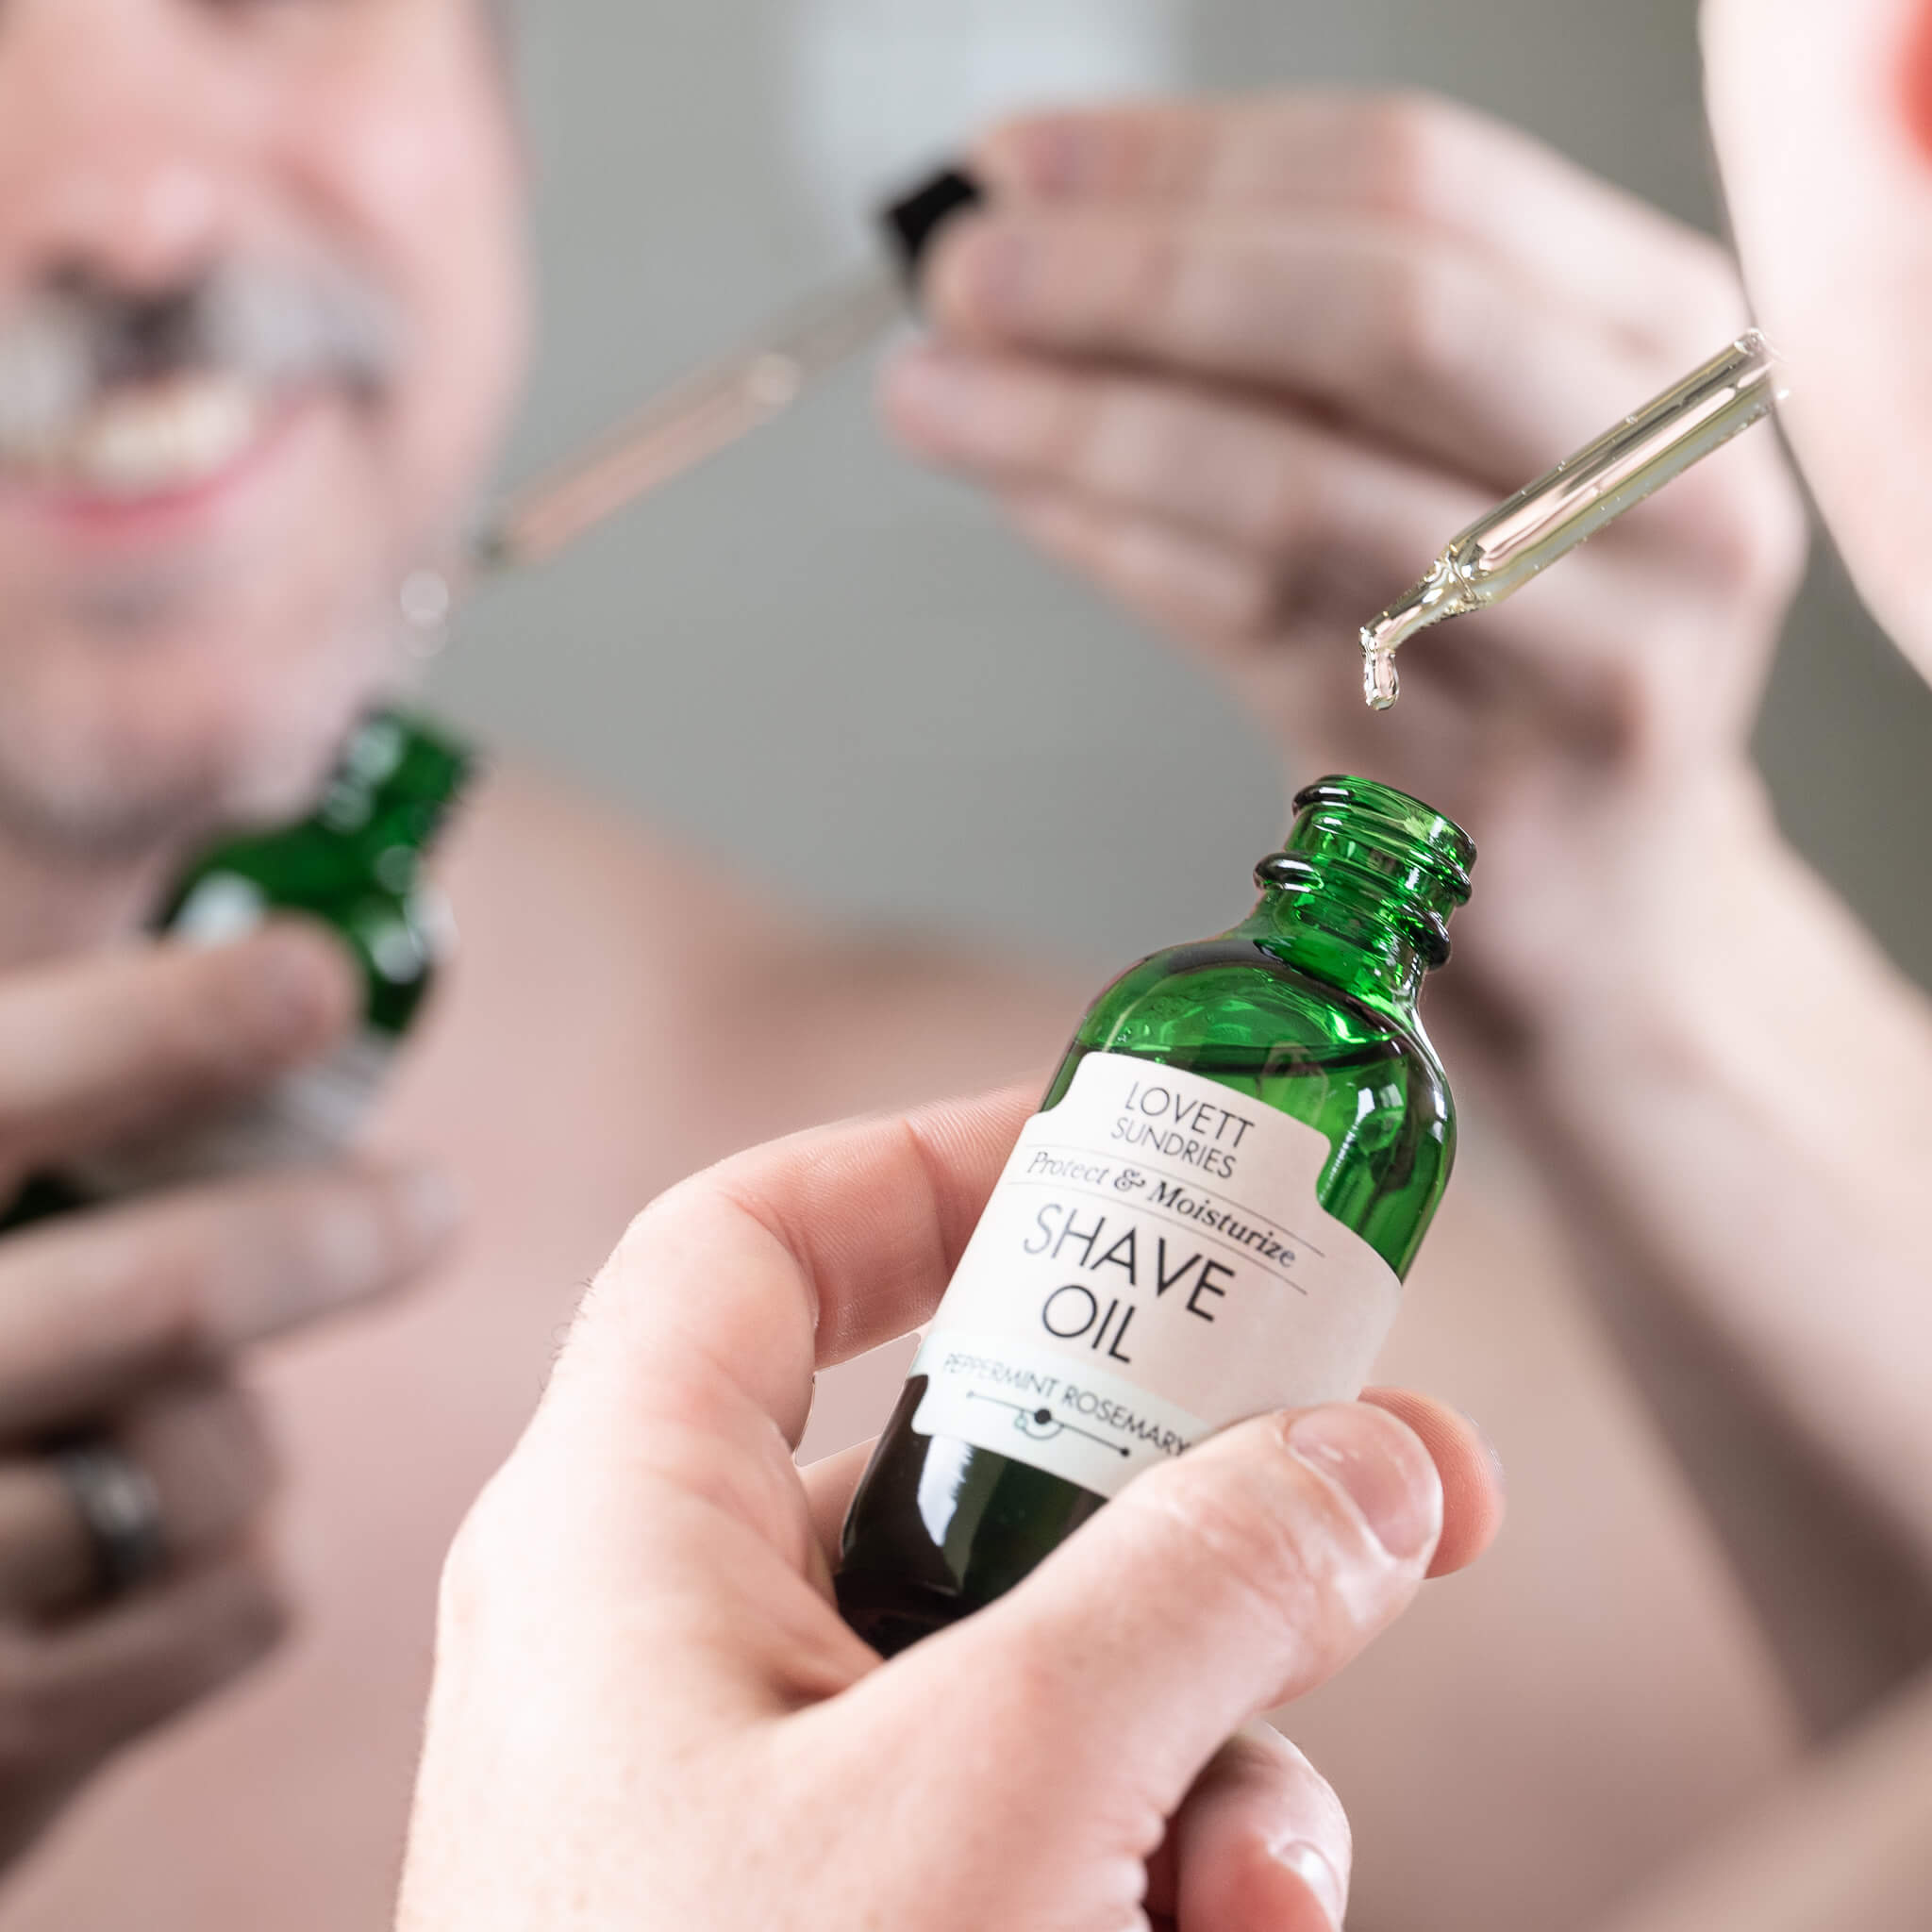 Man removing a glass dropper from a green bottle of Shaving Oil before shaving. 